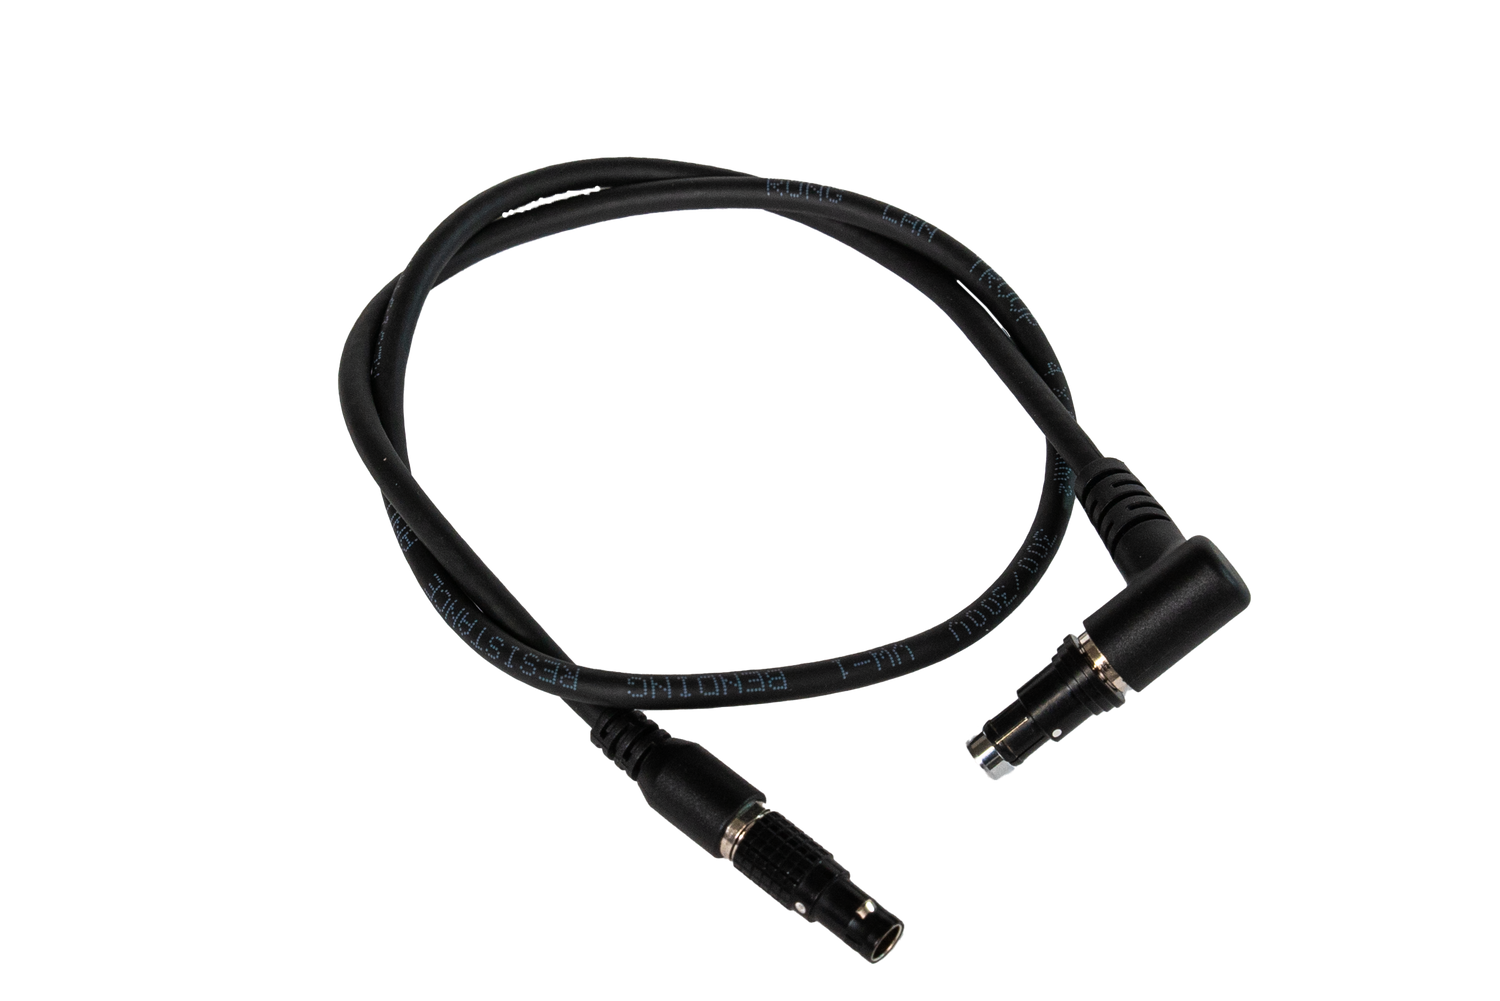 4-pin Fischer to 5-pin LEMO 00b cable